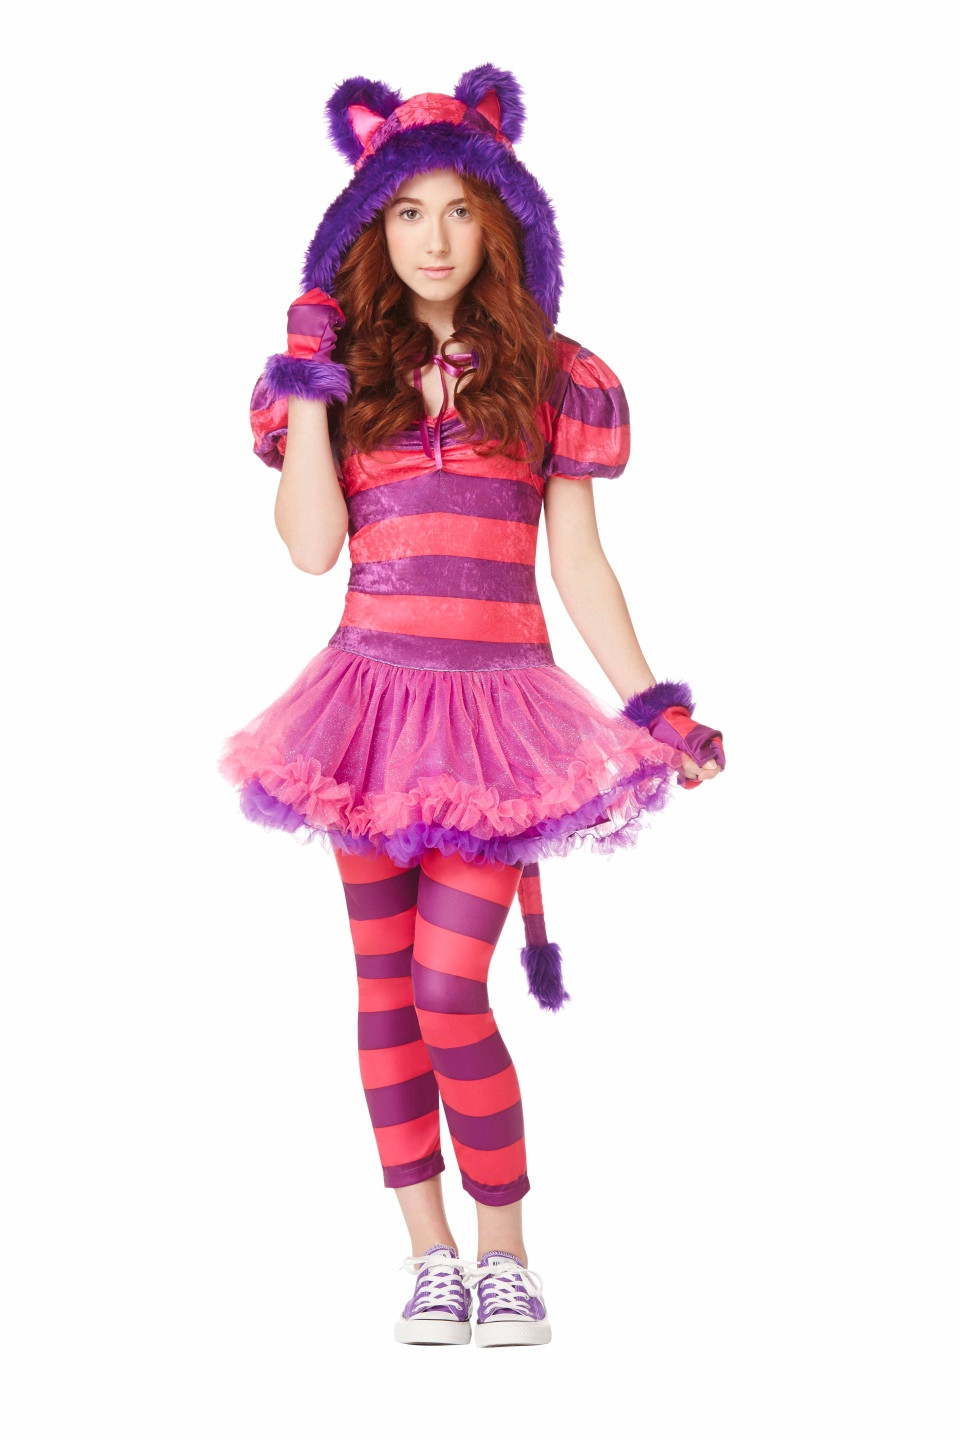 Halloween Party Ideas For 10 Year Olds
 Finding age appropriate Halloween costumes not always easy